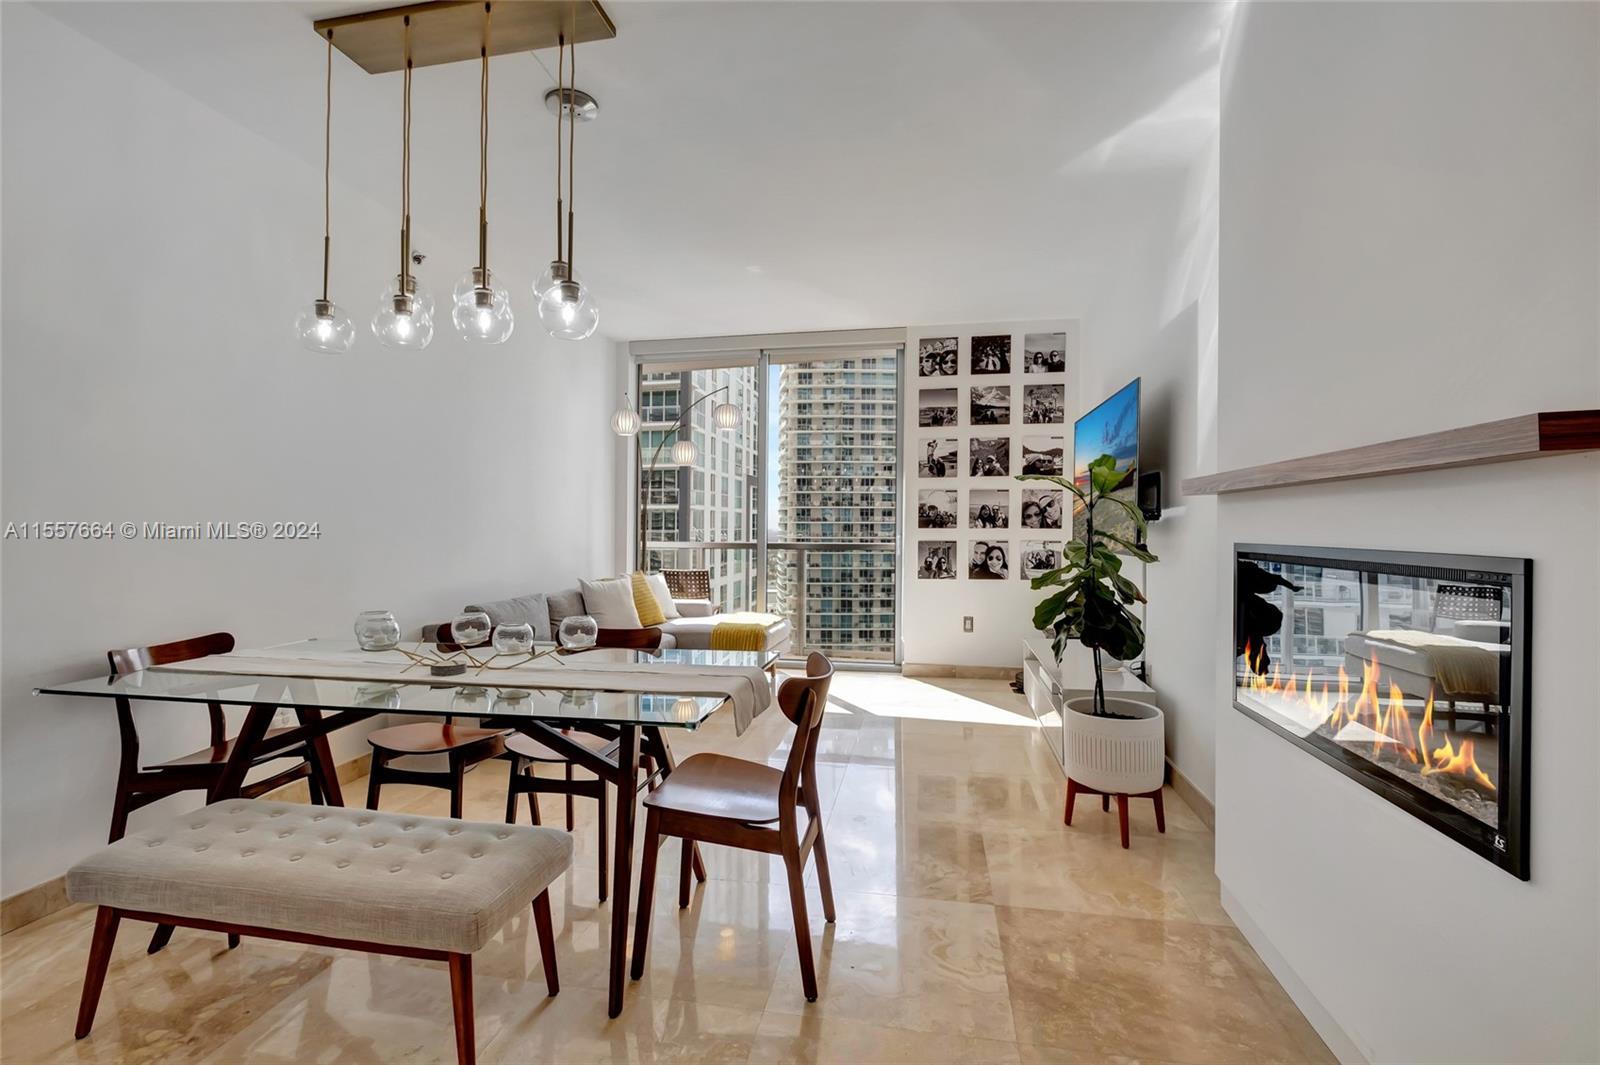 Luxurious Condo Living! Welcome to the epitome of urban elegance. Nestled in the heart of Miami's vi